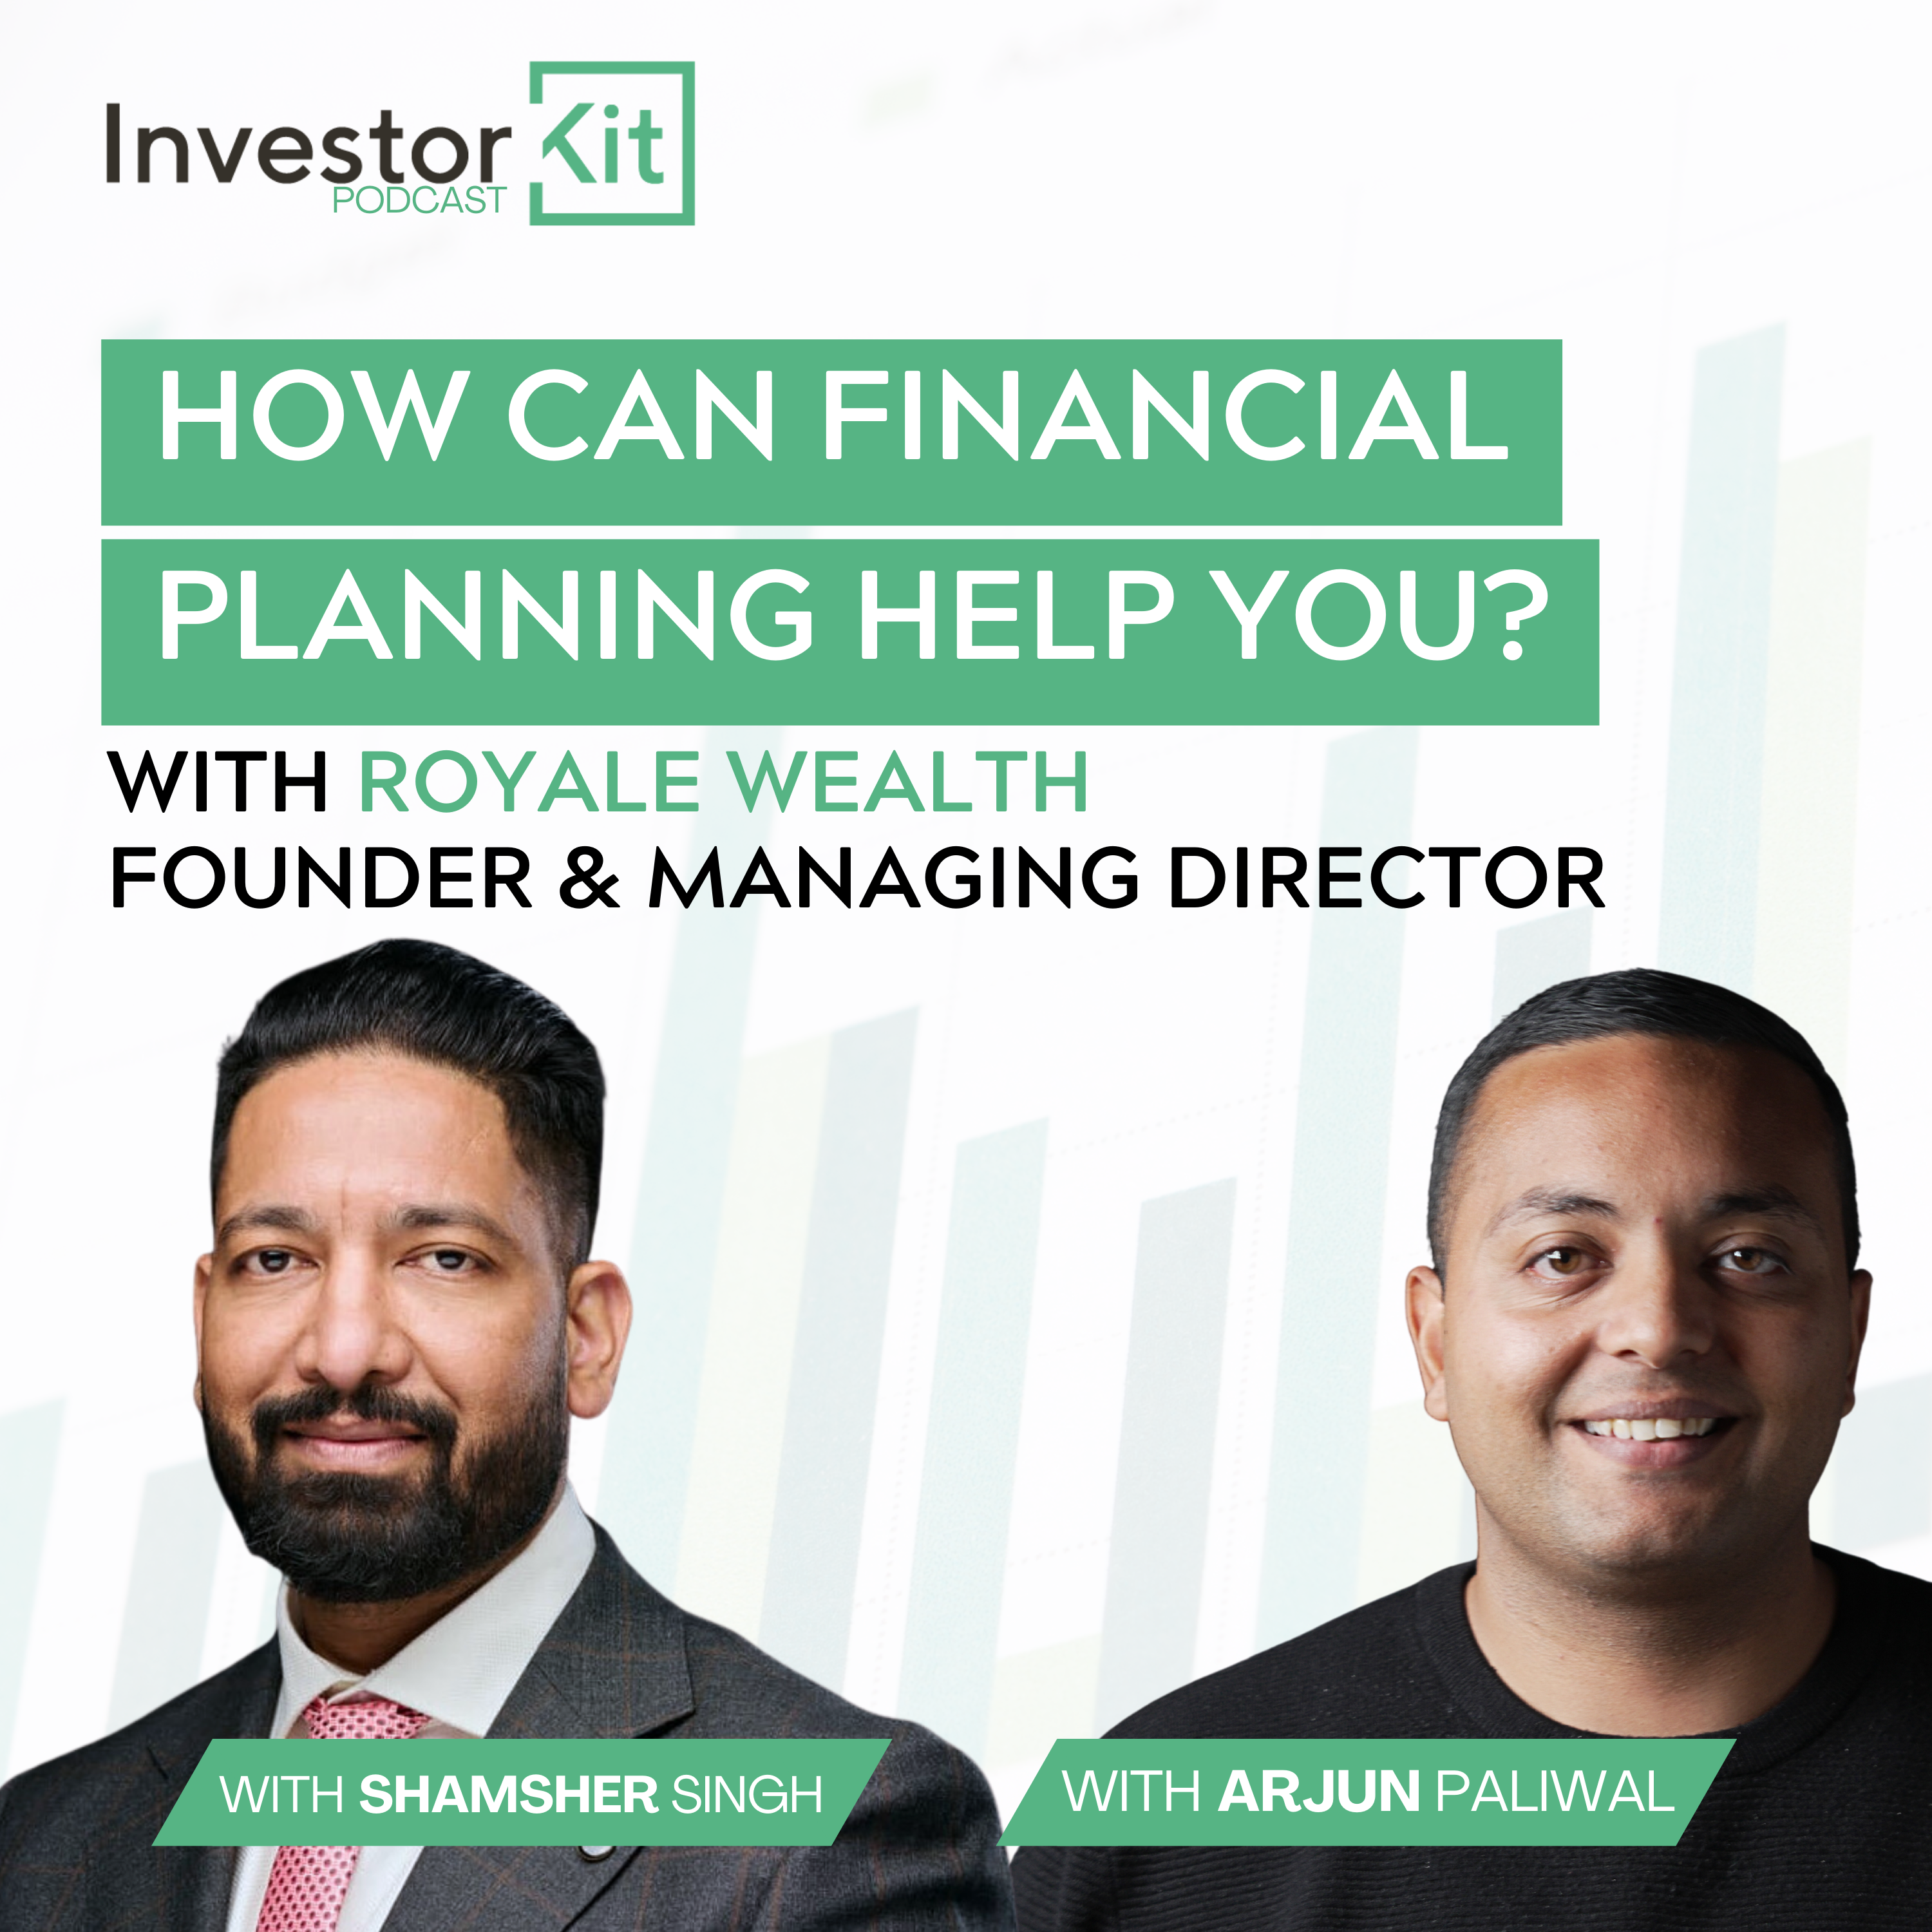 How to Build Wealth and Protect Your Future! Is Financial Planning Important? - With Shamsher Singh